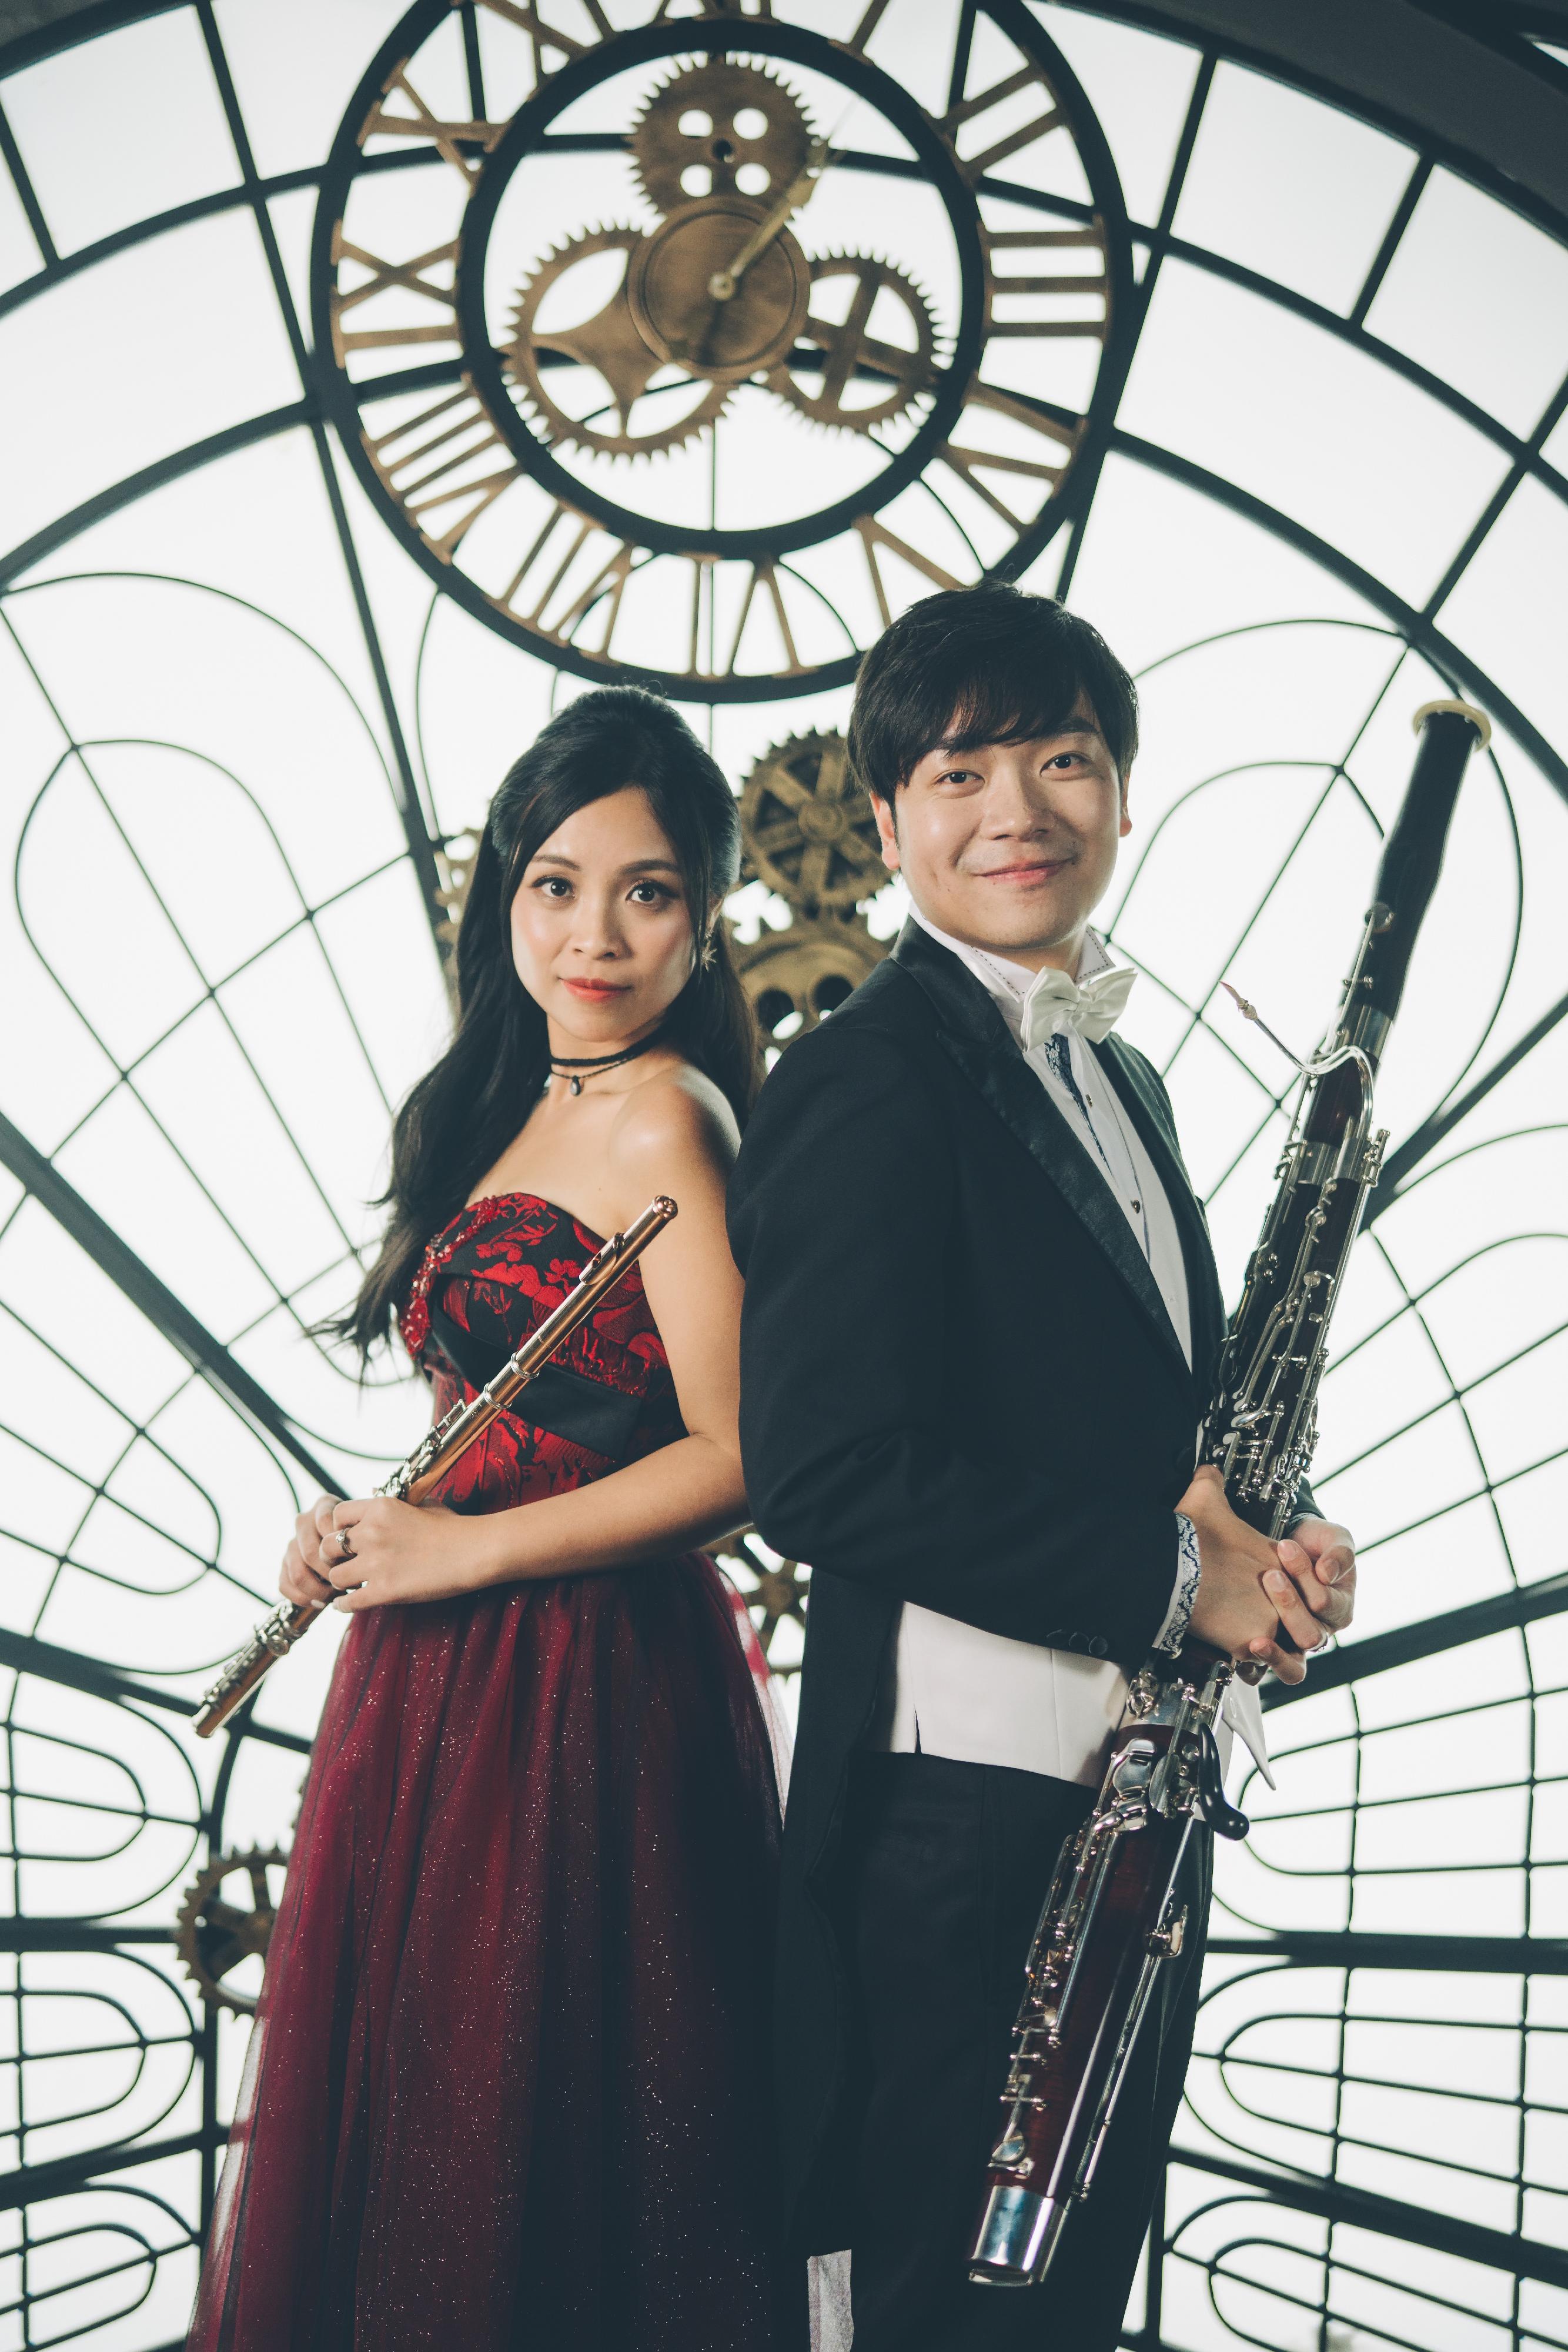 The Leisure and Cultural Services Department will launch its new "Hong Kong Artists" Series from May to November. Photo shows flautist Alice Hui (left) and bassoonist Tommy Liu (right).